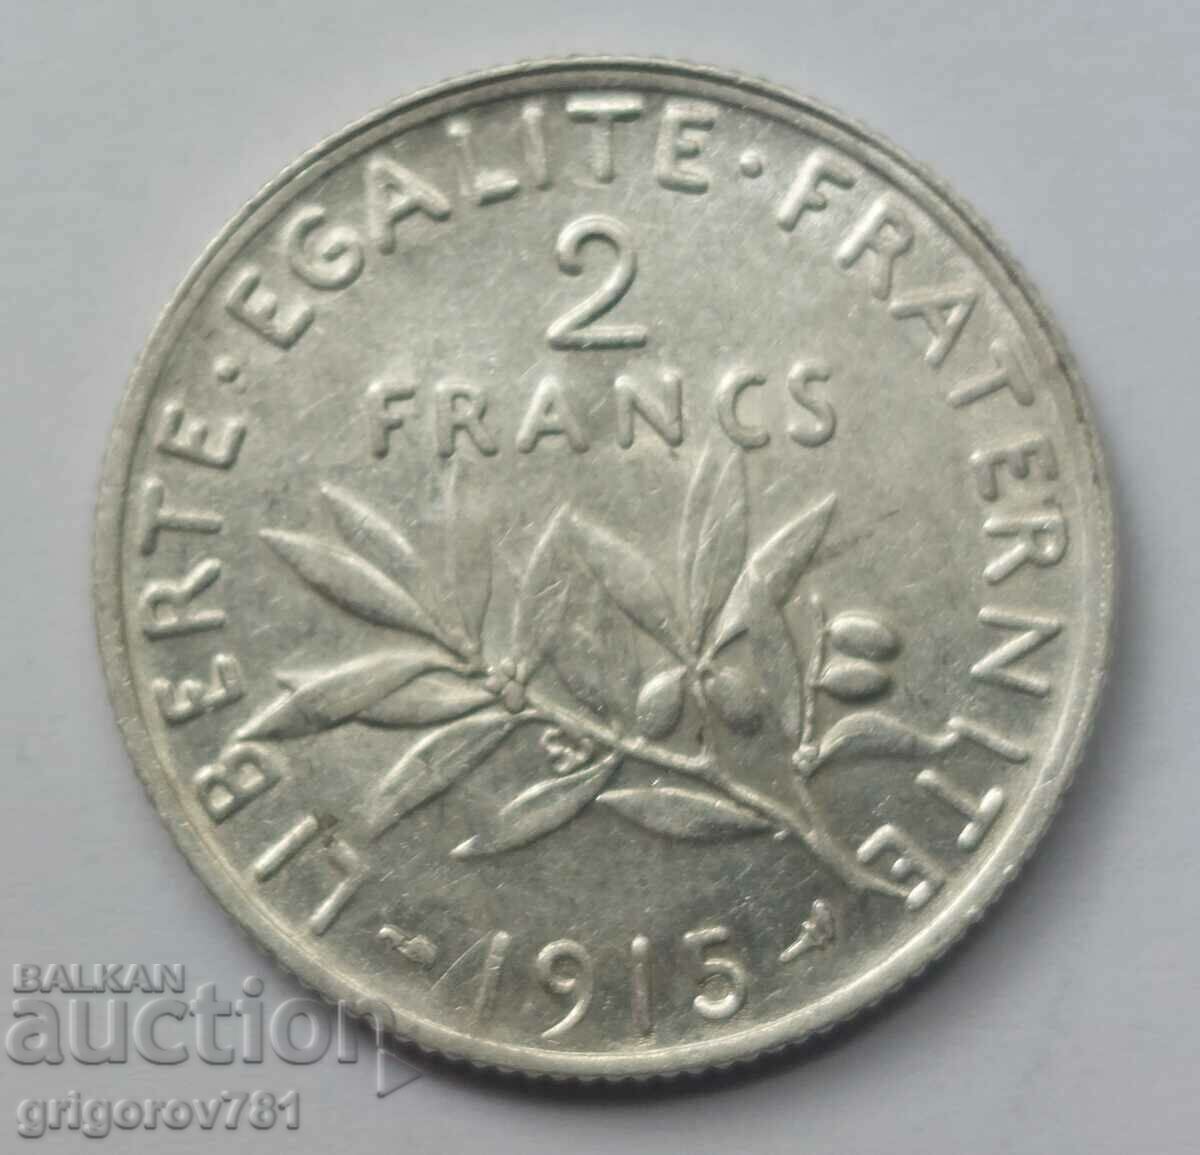 2 Francs Silver France 1915 - Silver Coin #63